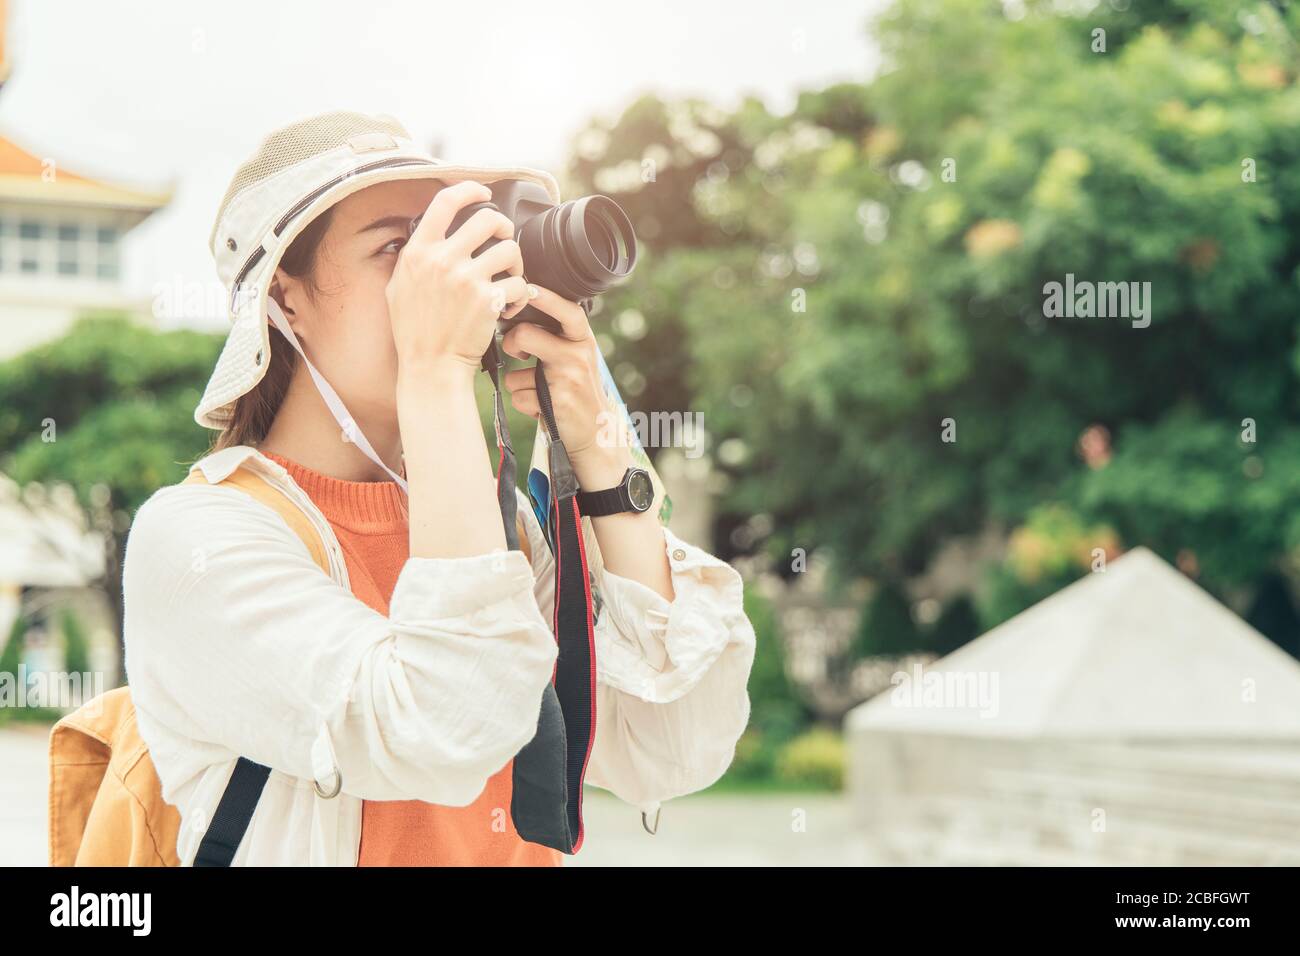 Tourist travel and take a photo outdoor with space for text Stock Photo